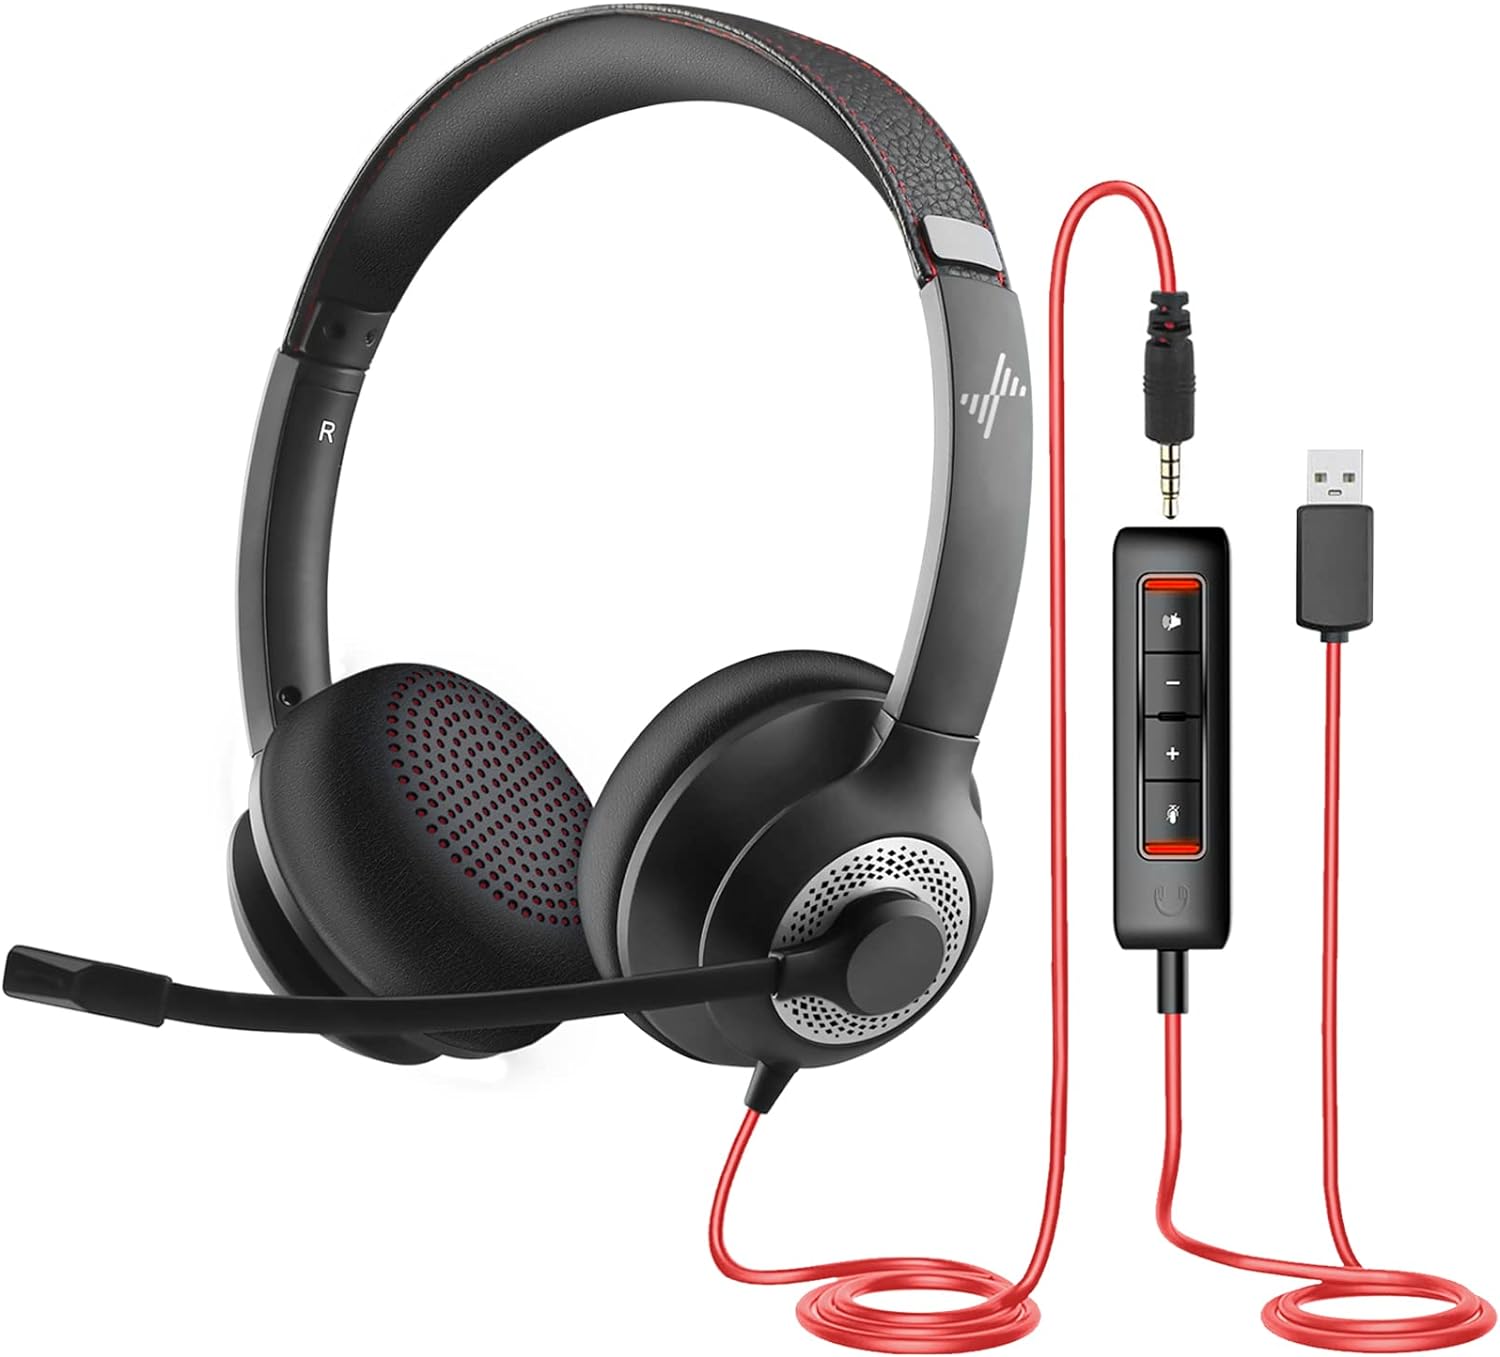 Grab the Hottest Deals! EAGLEND USB Headset with Mic for PC - Limited-Time Discount!